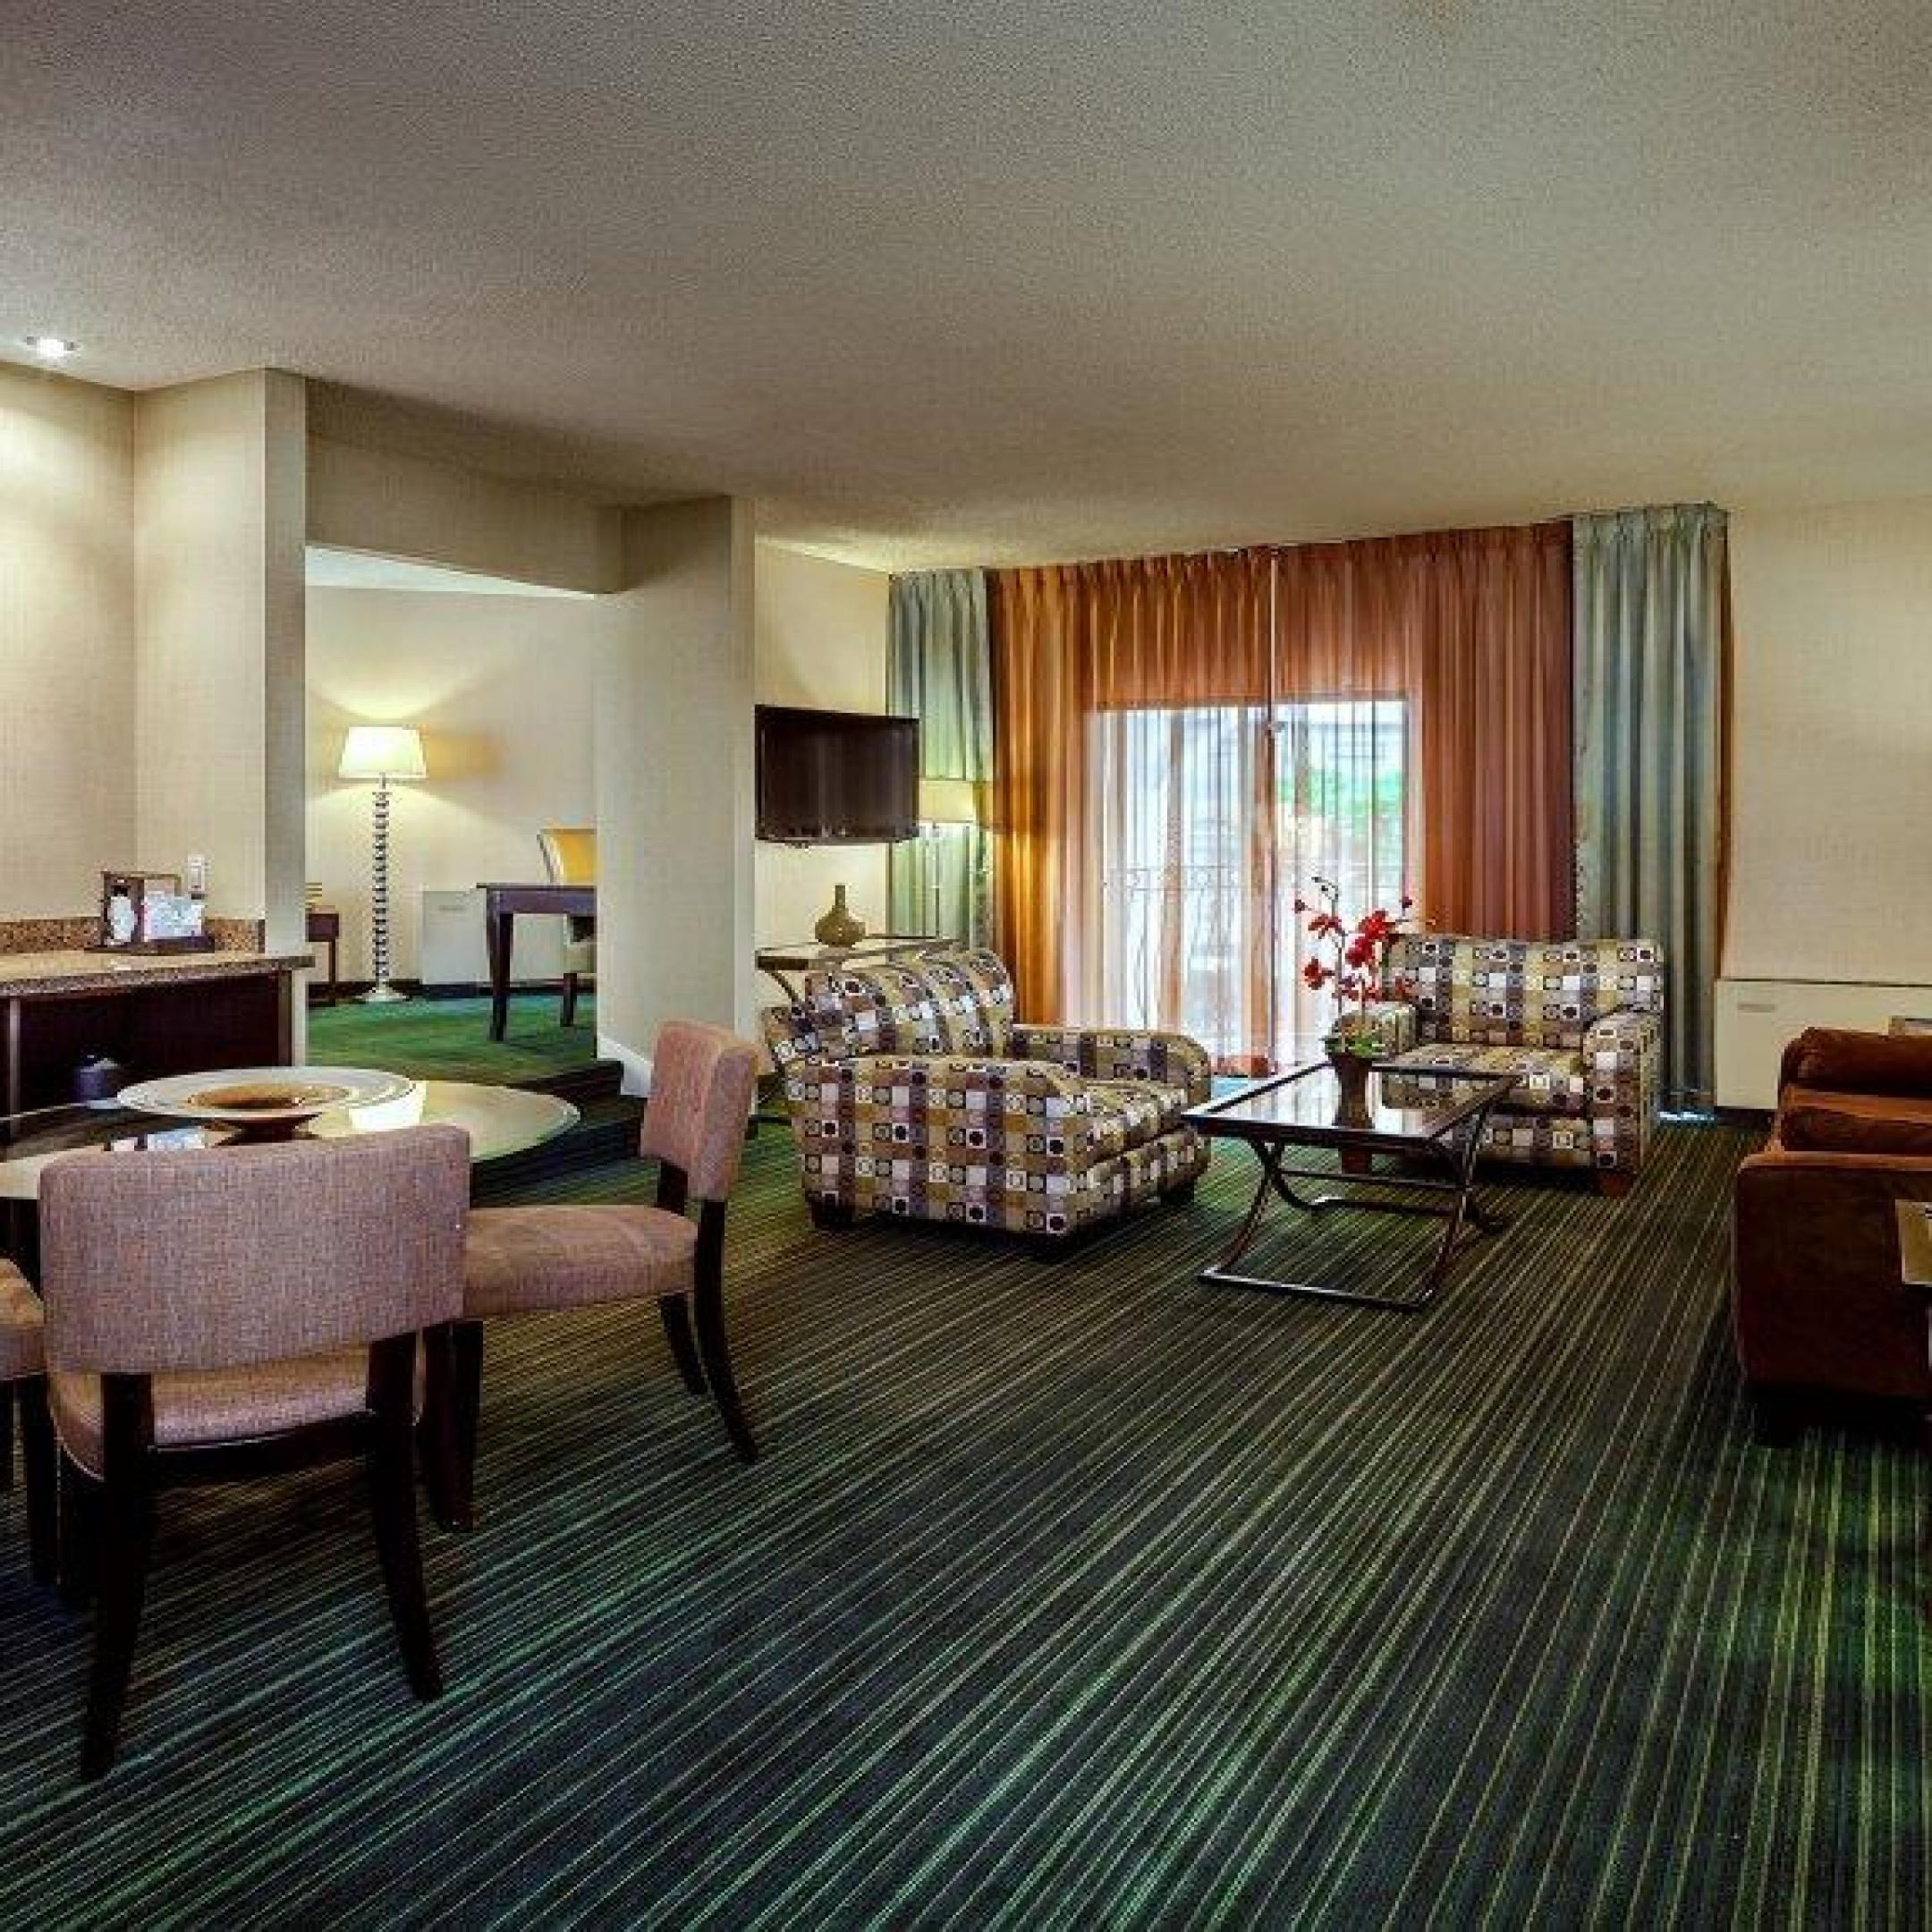 Stay in our upscale and elegant Presidential Suite